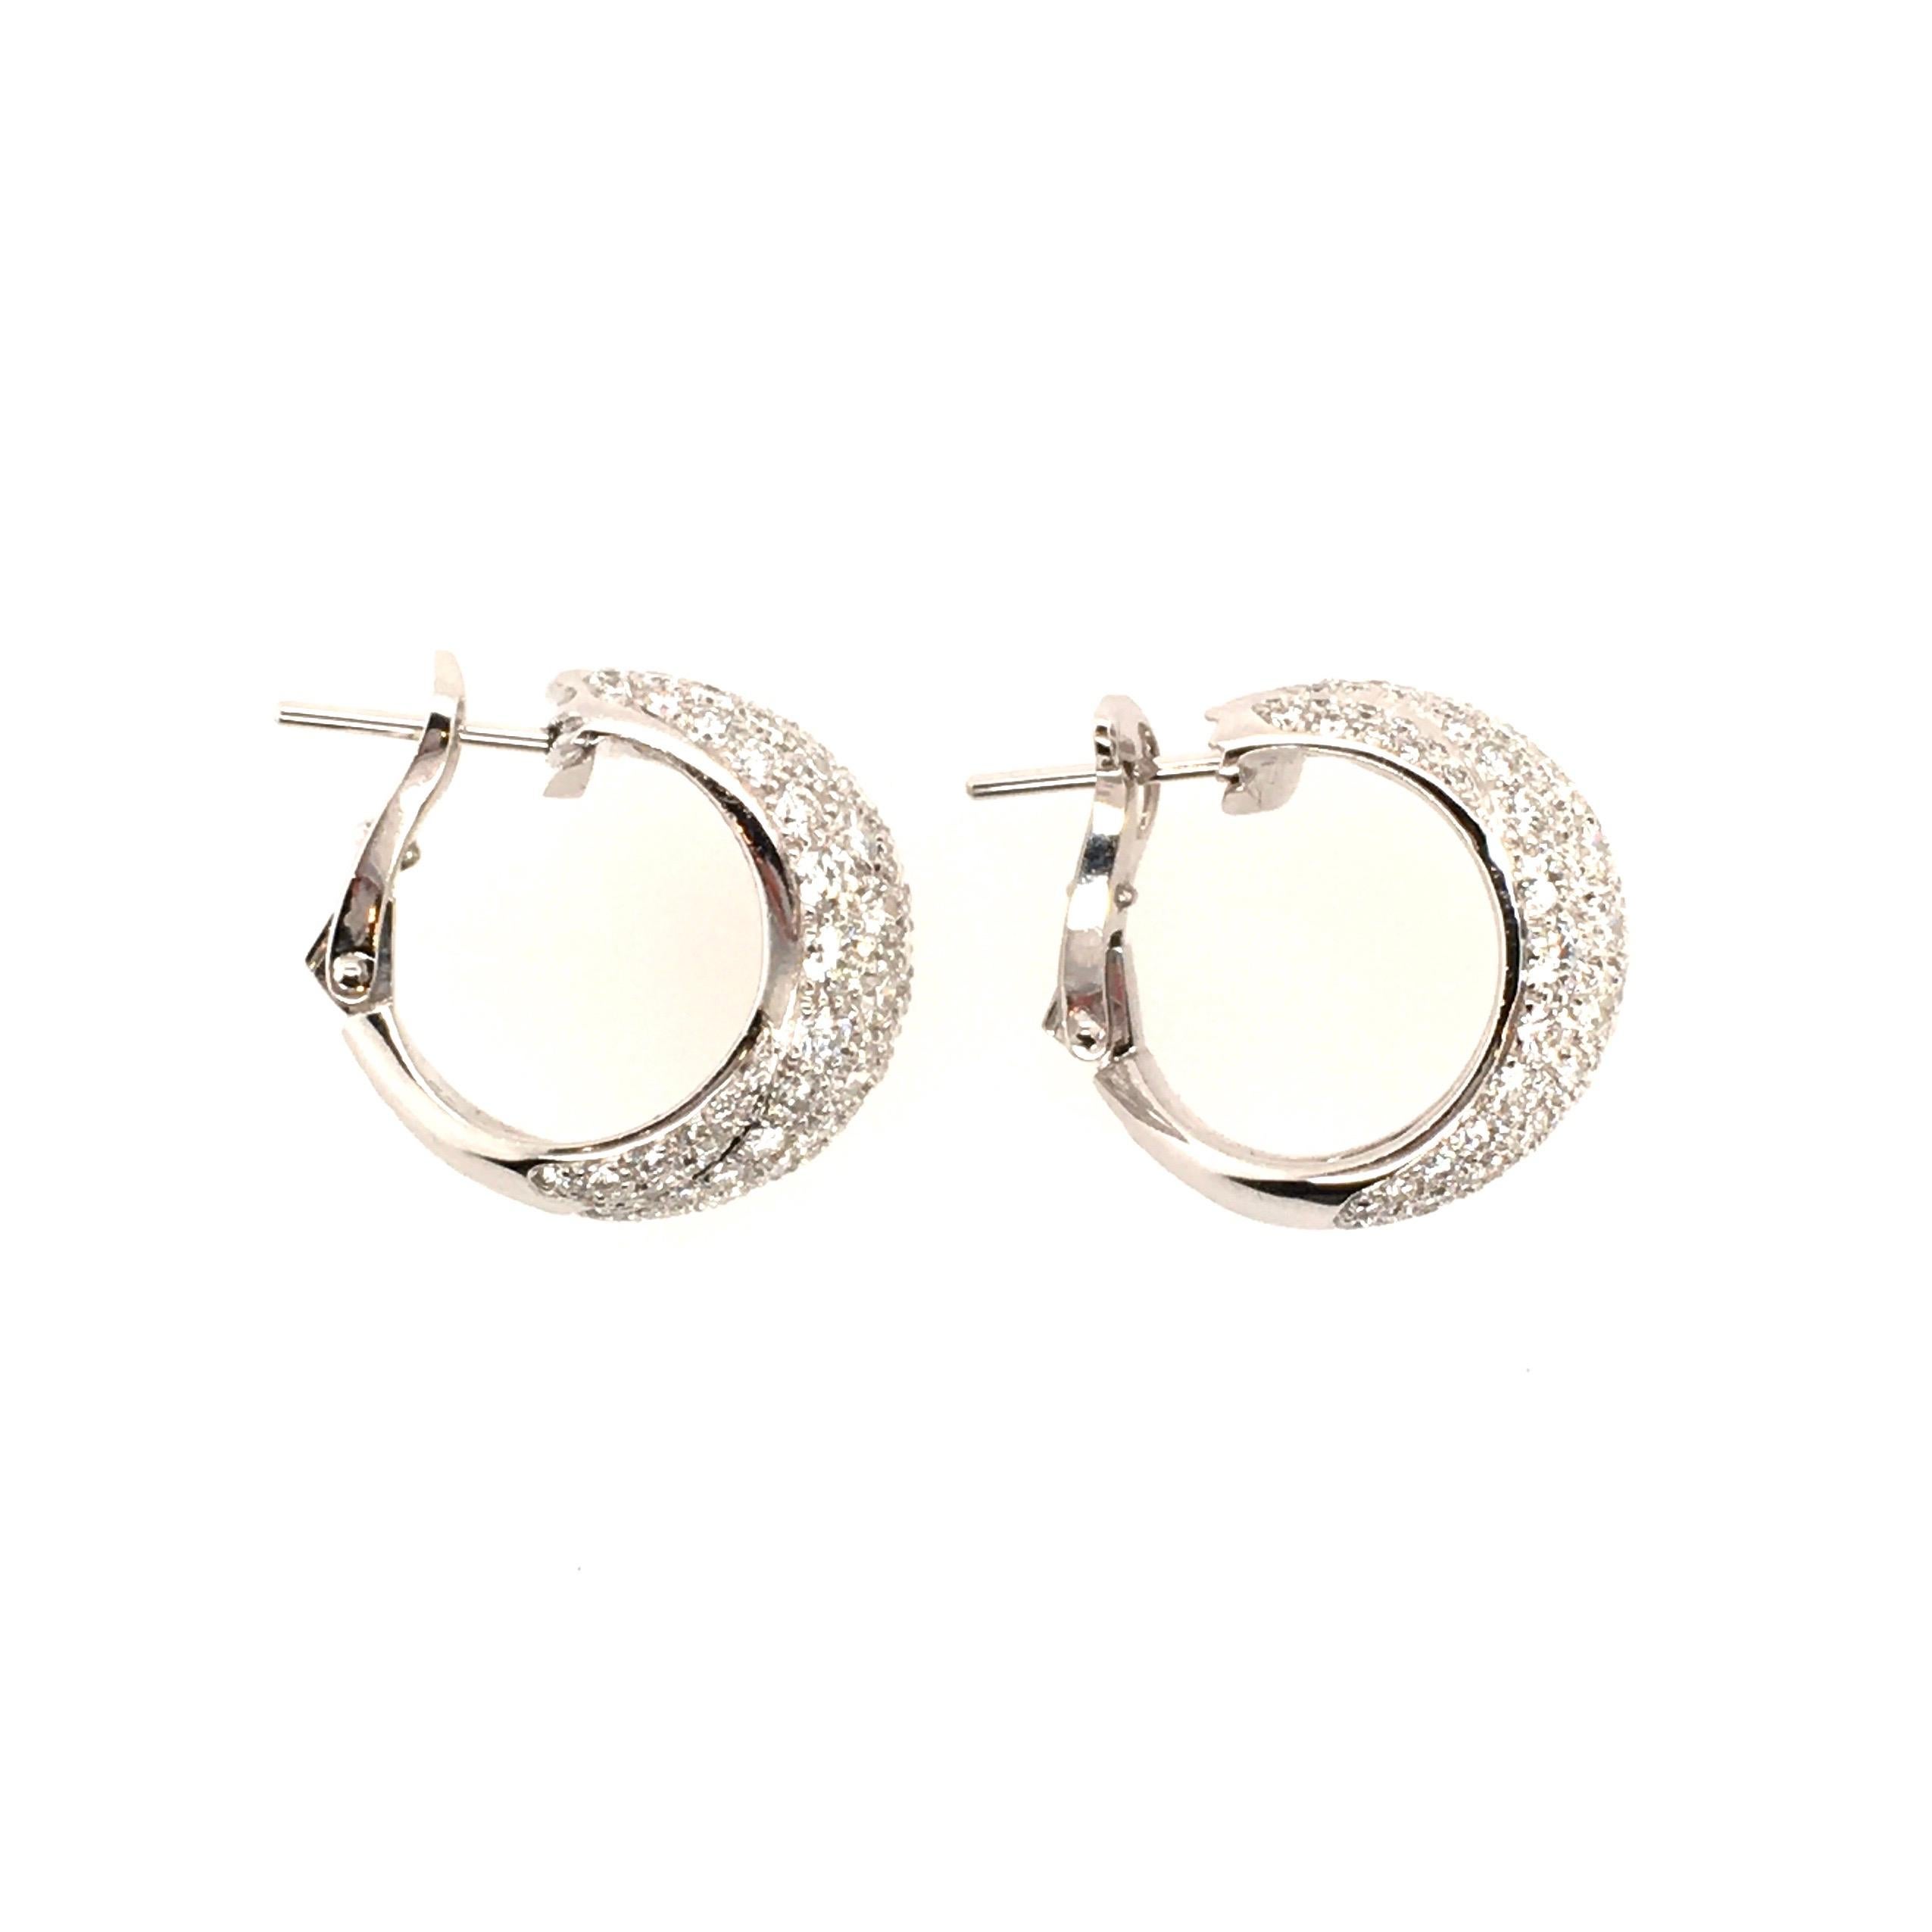 A pair of 18 karat white gold and diamond earrings. Cartier. Designed as a pave set hoop of overlapping design. One hundred and seventy eight  diamonds weigh 3.00 carats. Length is approximately 3/4 inches, gross weight is approximately 12.0 grams.